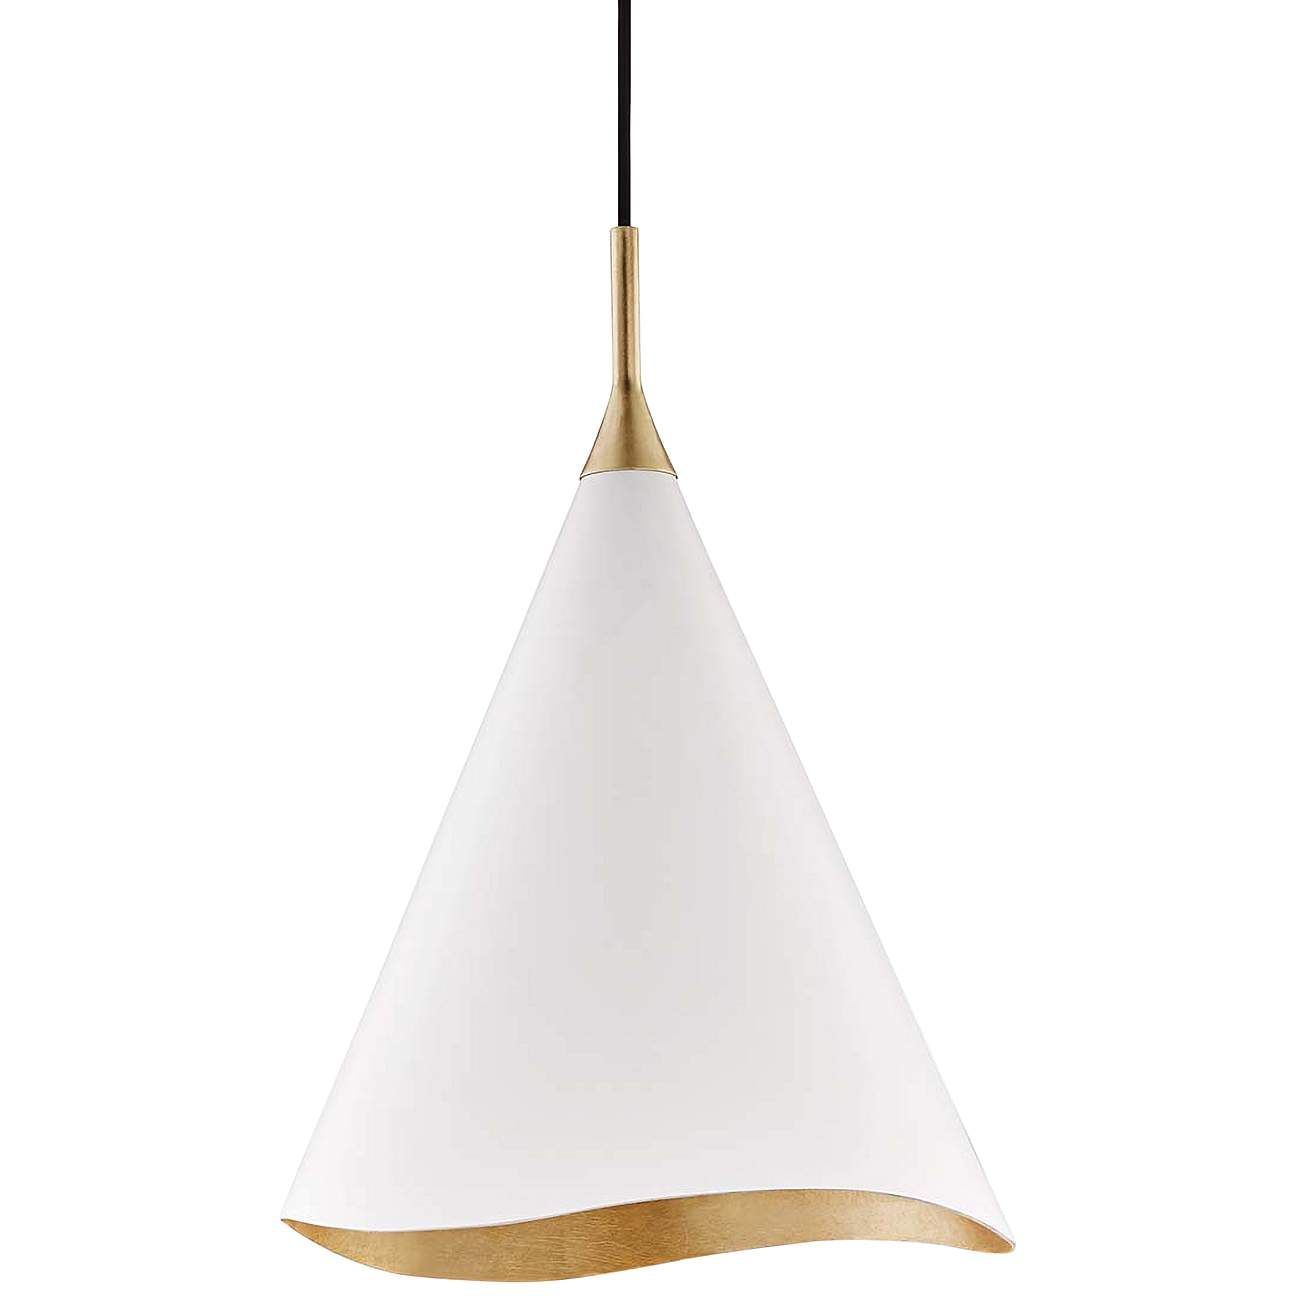 Hudson Valley Martini 13"W Gold Leaf and White Pendant Light | Lamps Plus